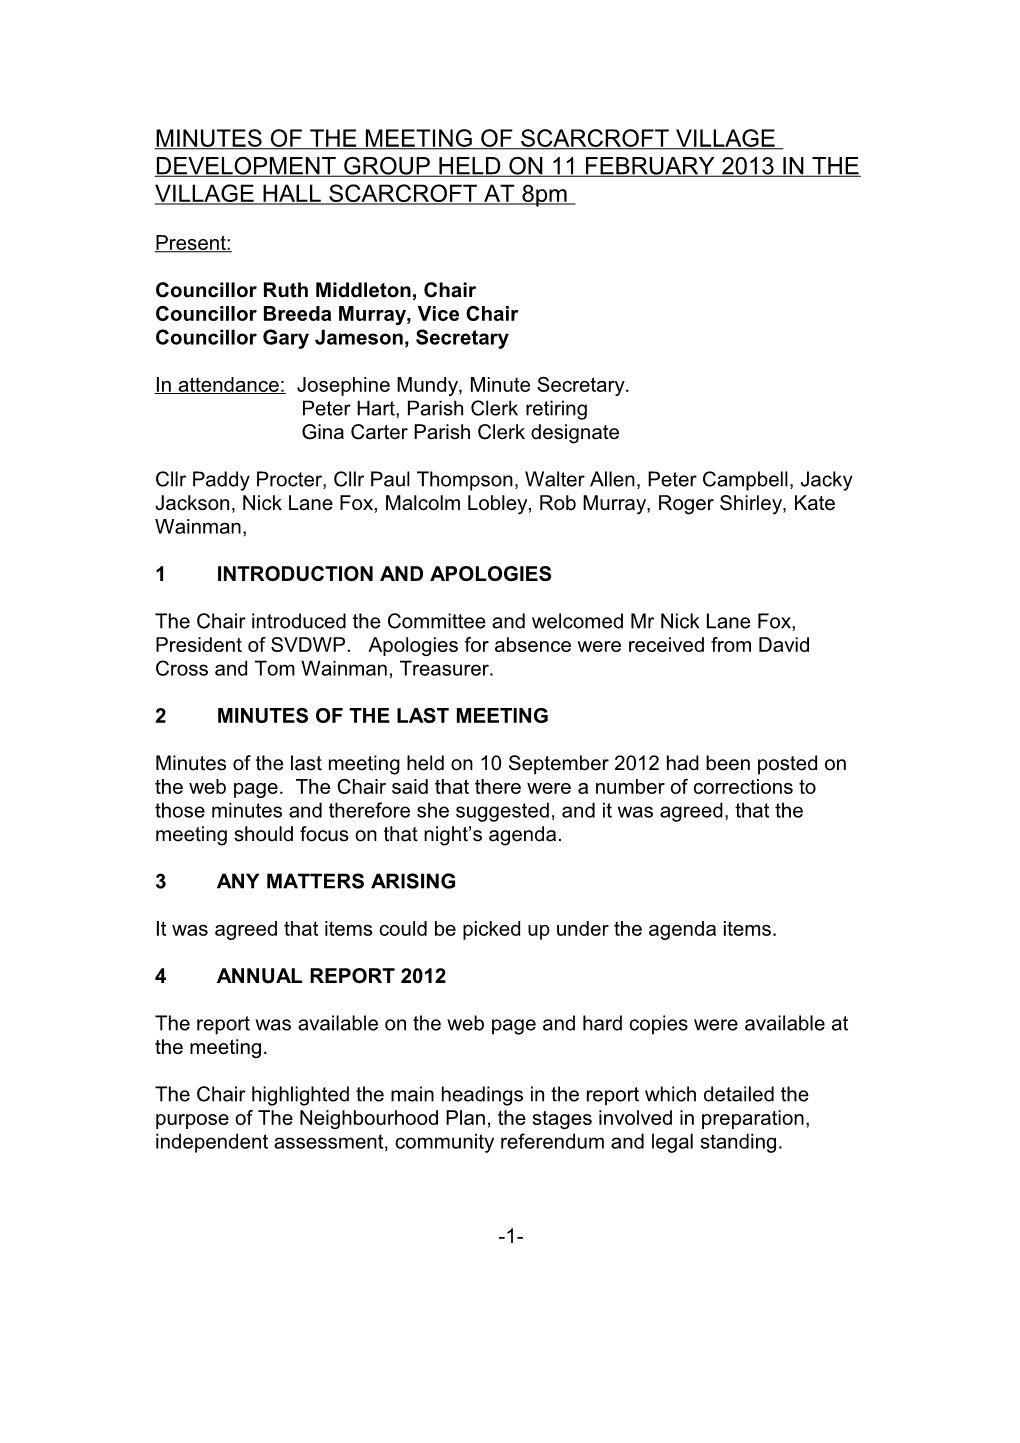 Minutes of the Meeting of Scarcroft Village Development Executive Group Held on 11 December